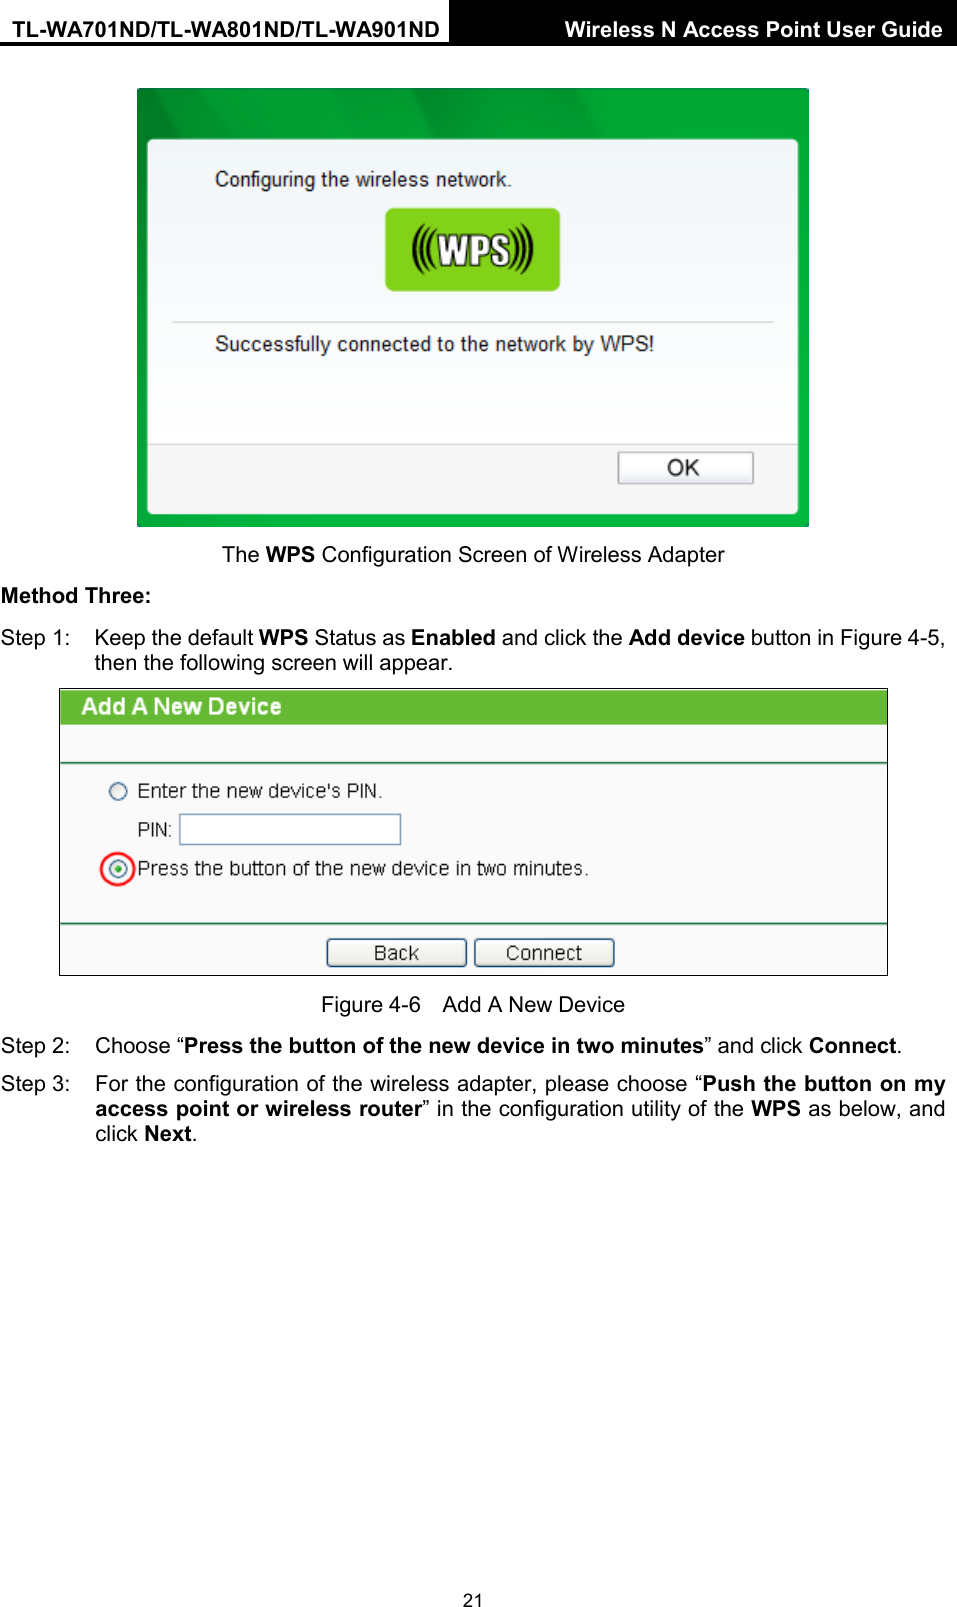 TL-WA701ND/TL-WA801ND/TL-WA901ND Wireless N Access Point User Guide  21  The WPS Configuration Screen of Wireless Adapter Method Three: Step 1: Keep the default WPS Status as Enabled and click the Add device button in Figure 4-5, then the following screen will appear.    Figure 4-6  Add A New Device Step 2:  Choose “Press the button of the new device in two minutes” and click Connect. Step 3: For the configuration of the wireless adapter, please choose “Push the button on my access point or wireless router” in the configuration utility of the WPS as below, and click Next.   